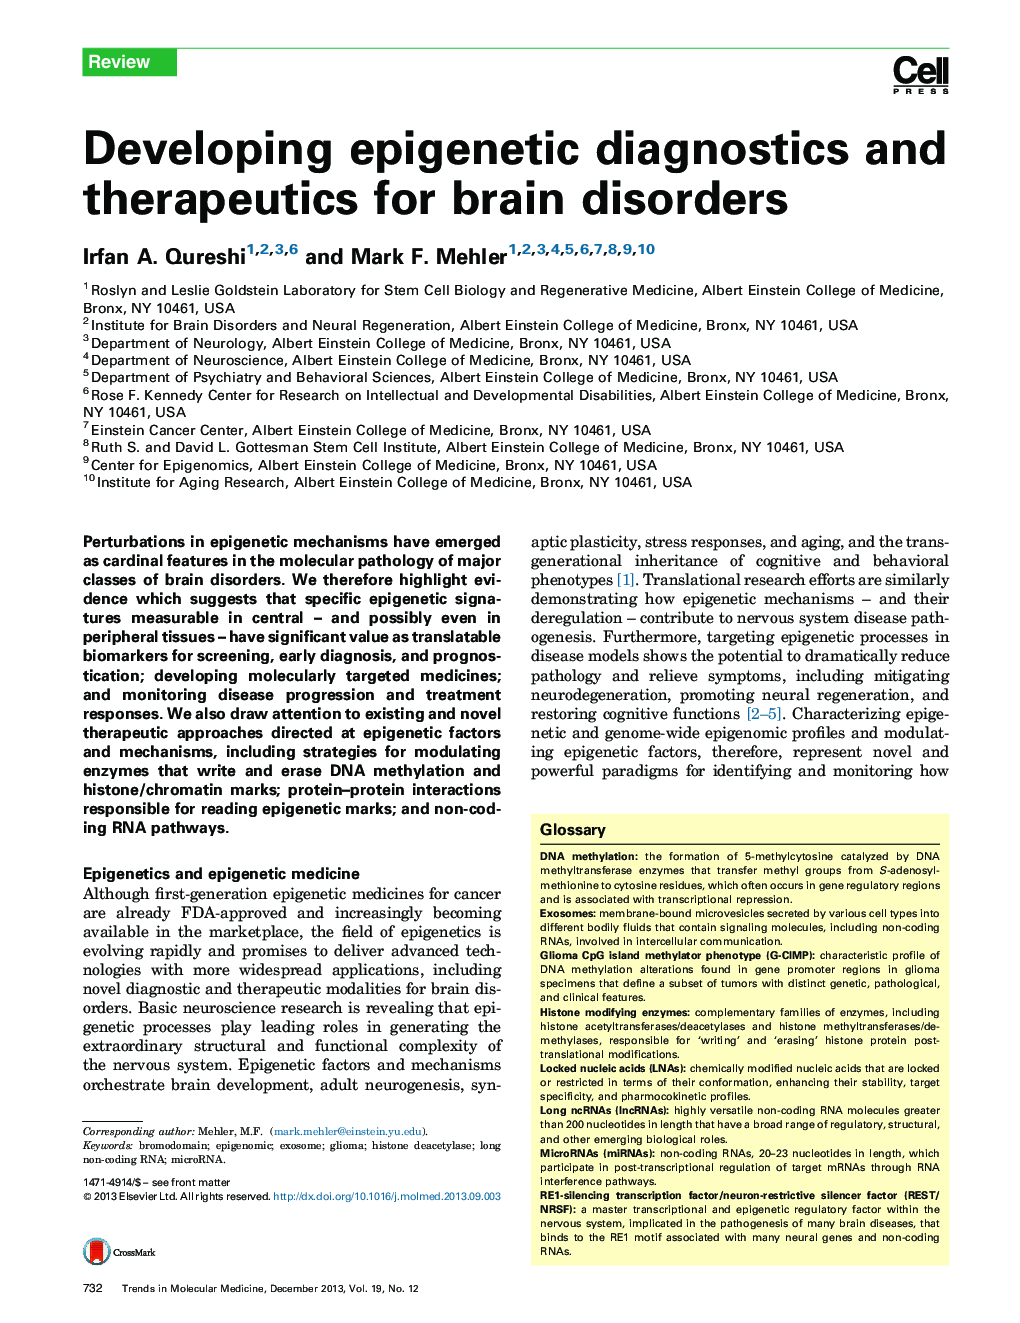 Developing epigenetic diagnostics and therapeutics for brain disorders